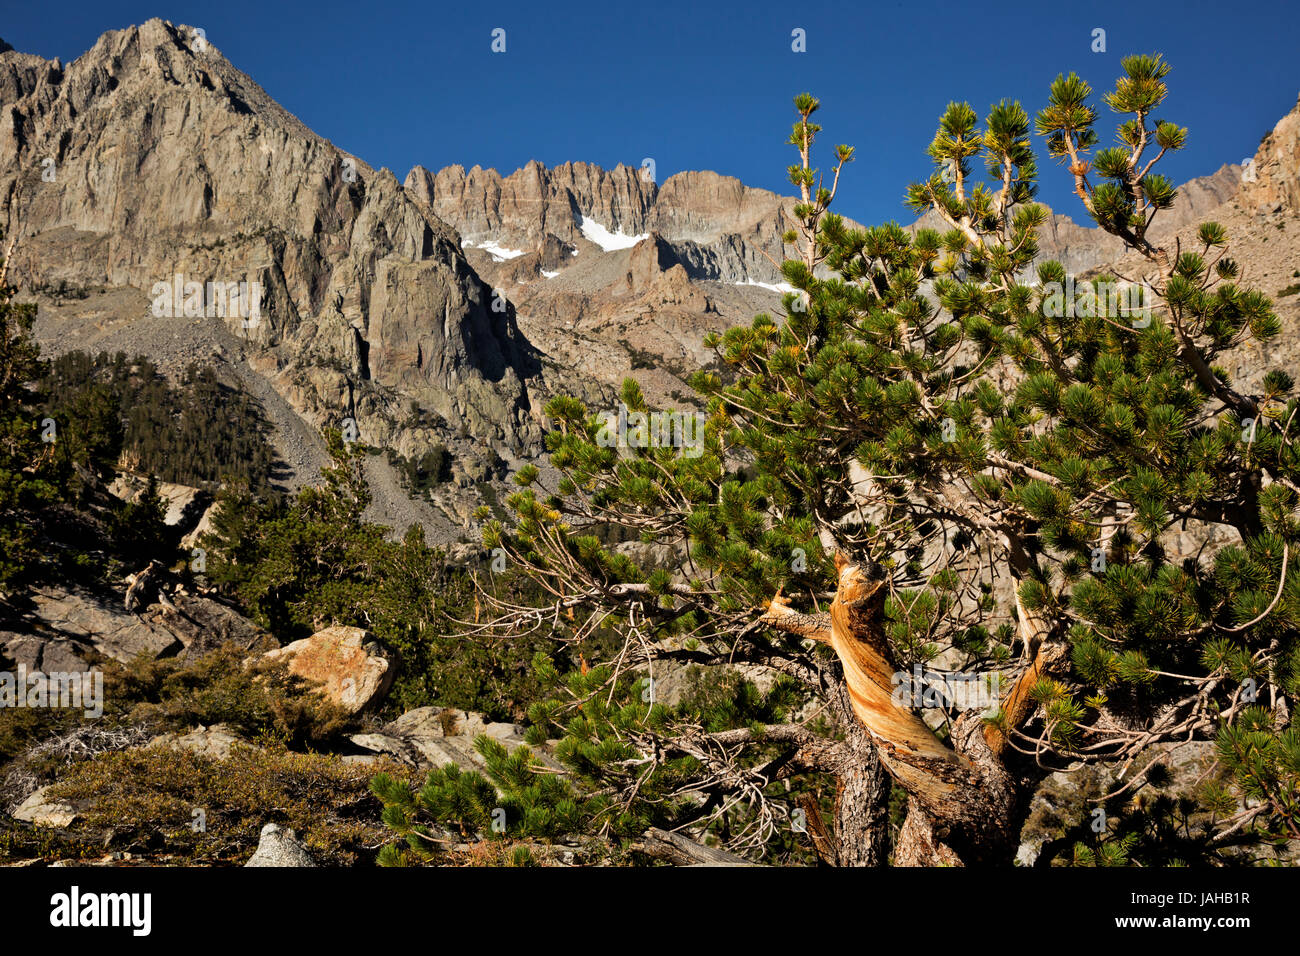 CA03285-00...CALIFORNIA - The Palisade Crest at the head of the South Fork Big Pine Creek Valley in the John Muir Wilderness. Stock Photo